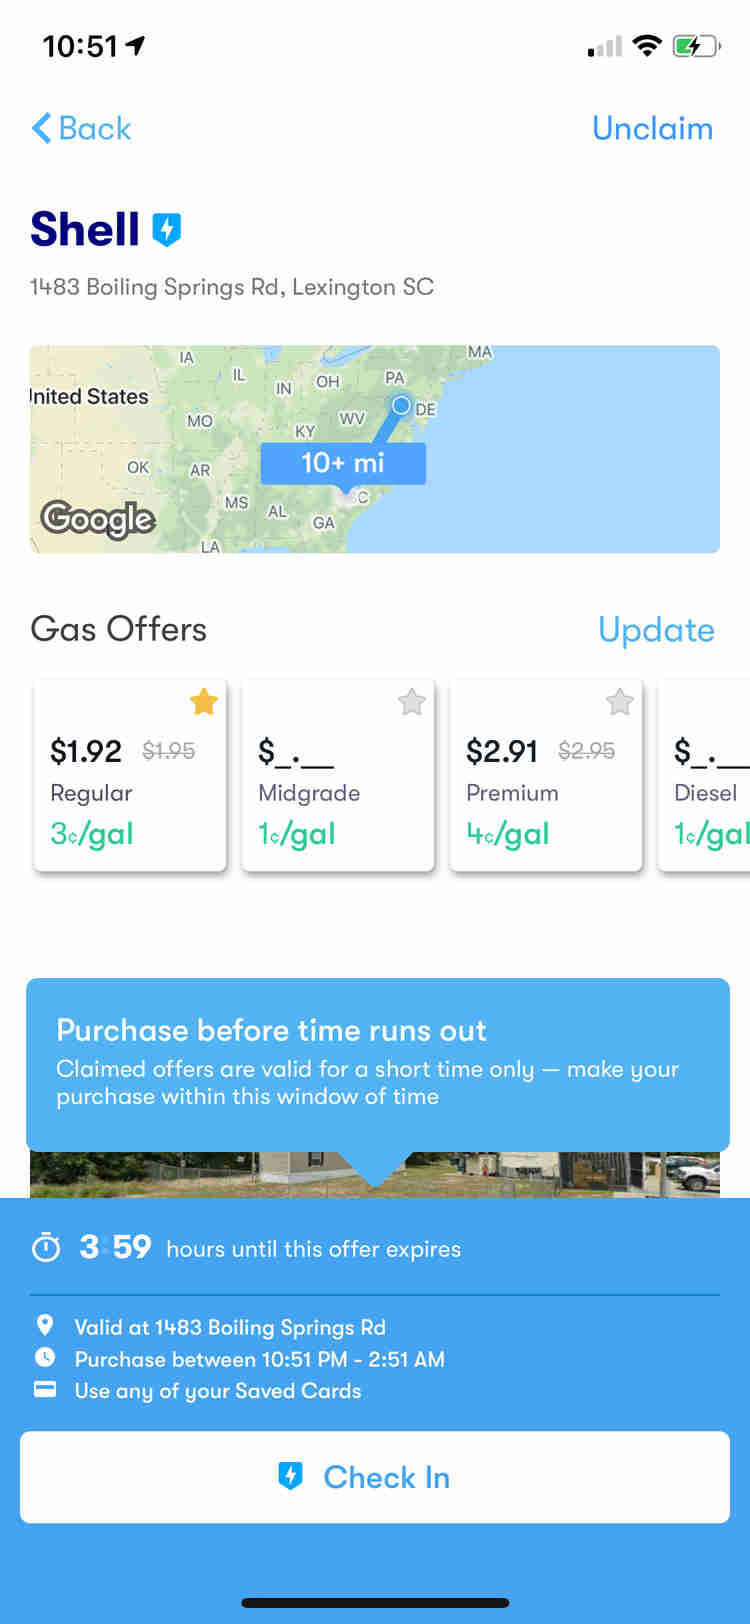 Image showing gas station offers in the GetUpside (Upside) fuel app